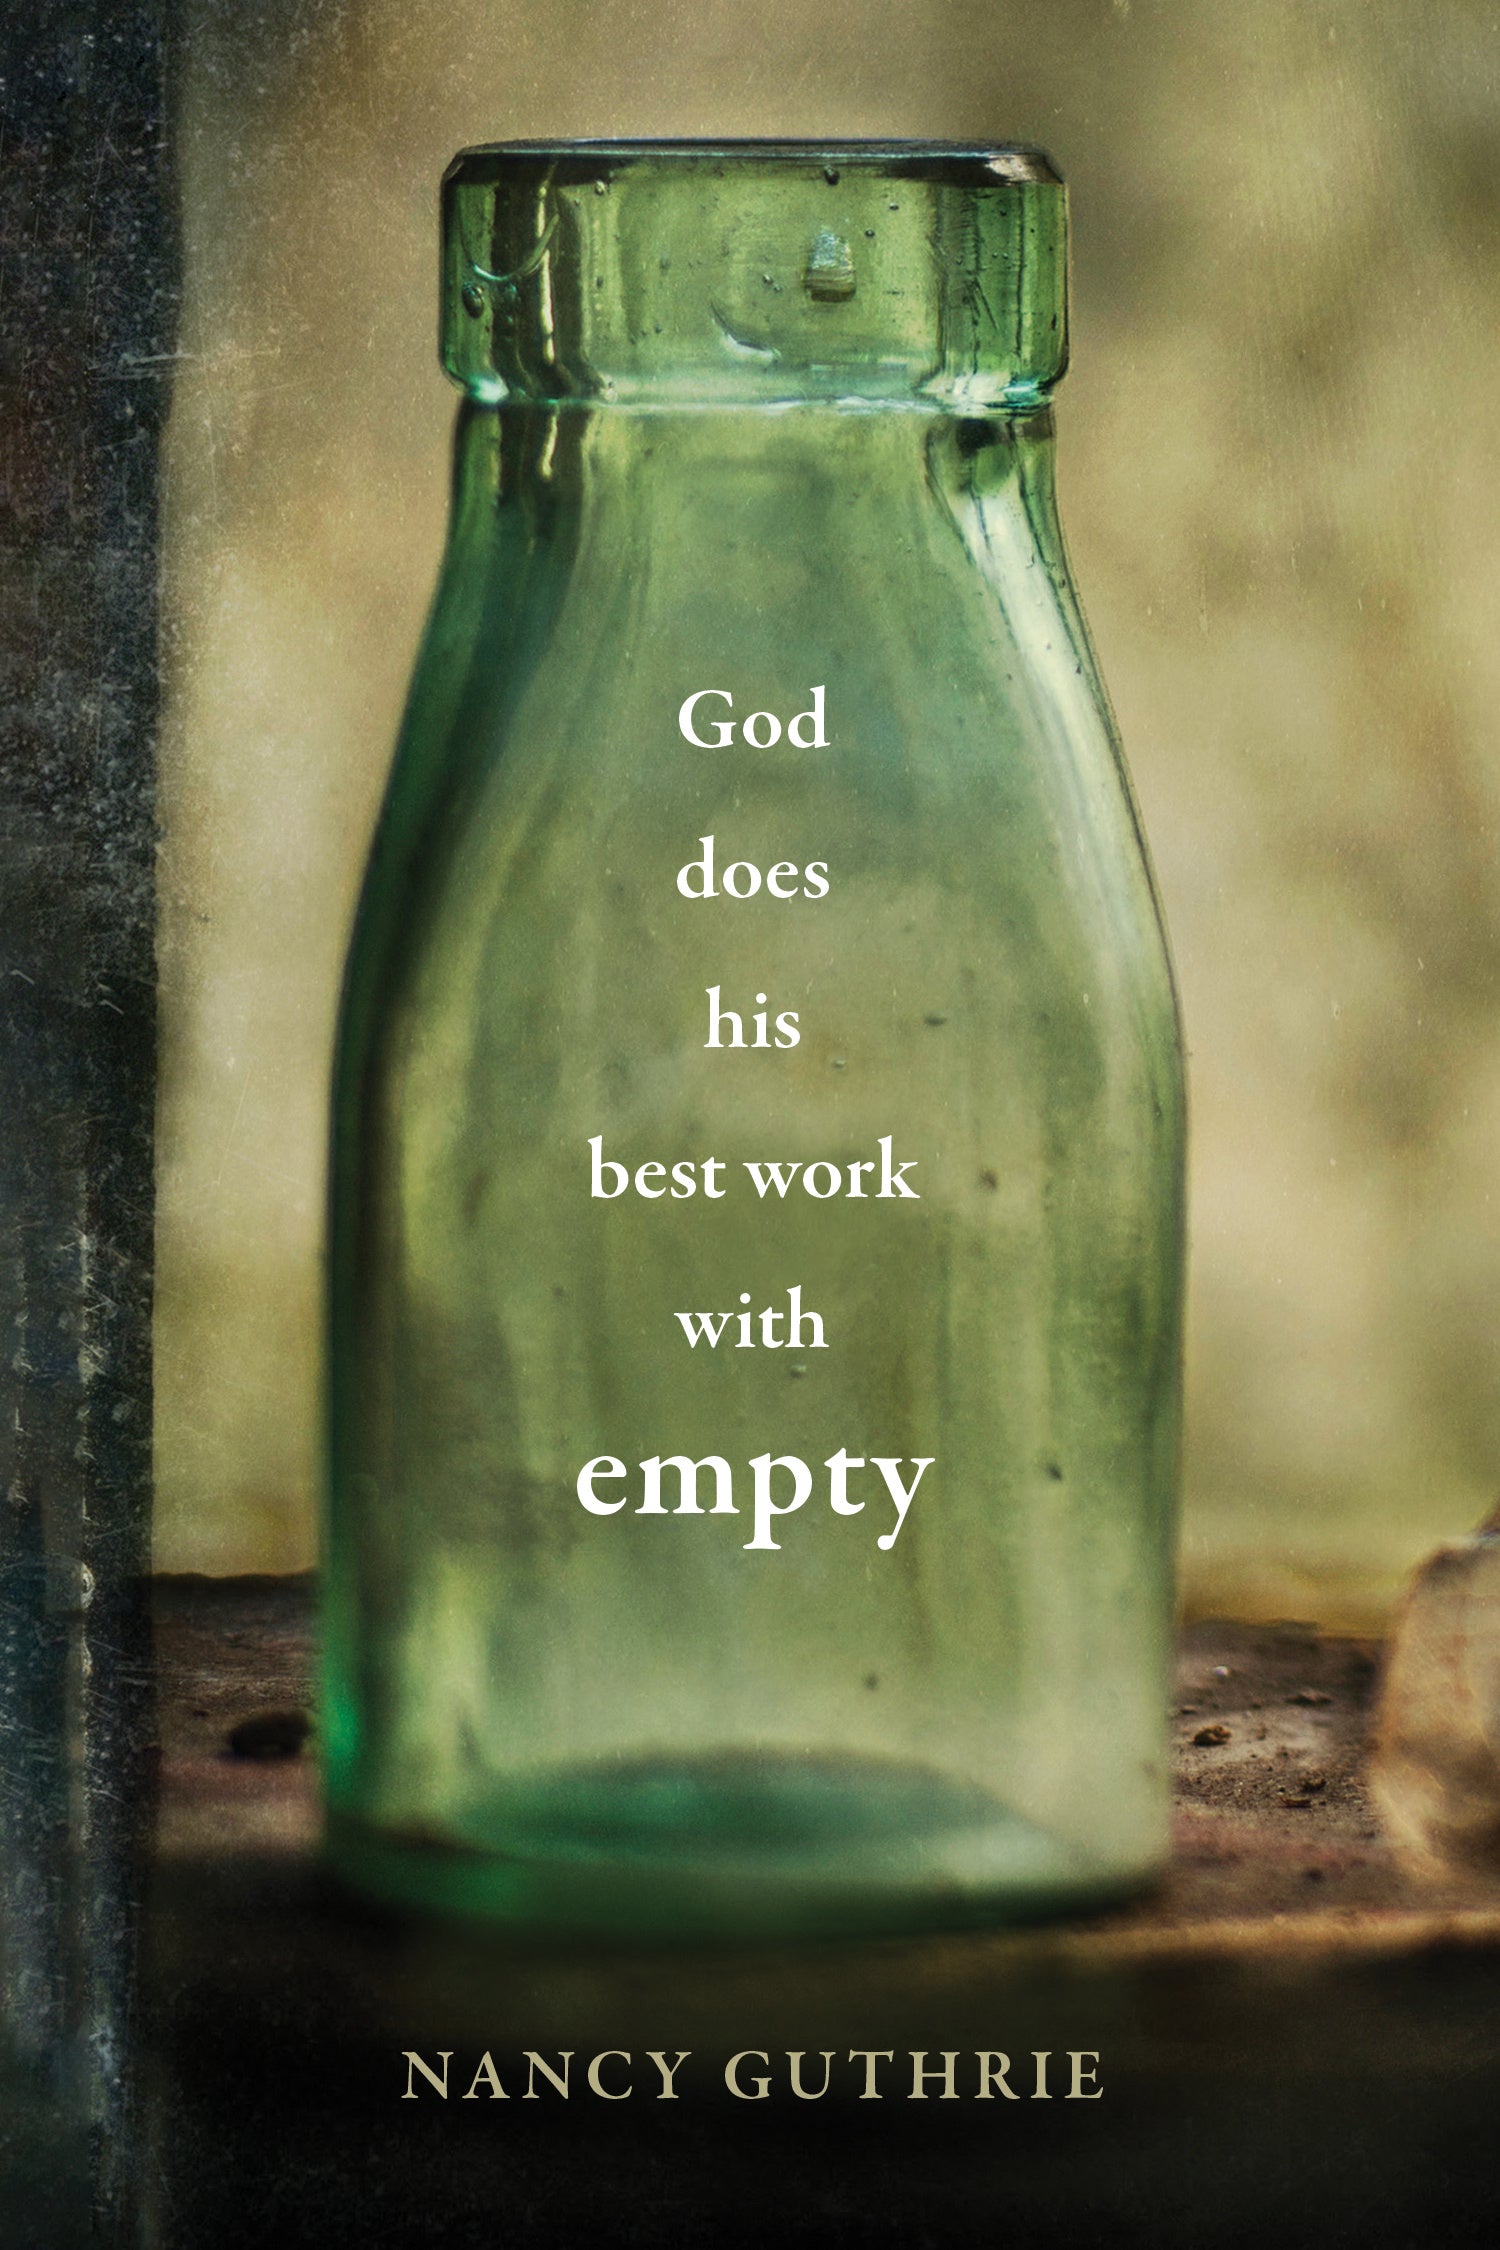 Image of God Does His Best Work with Empty other